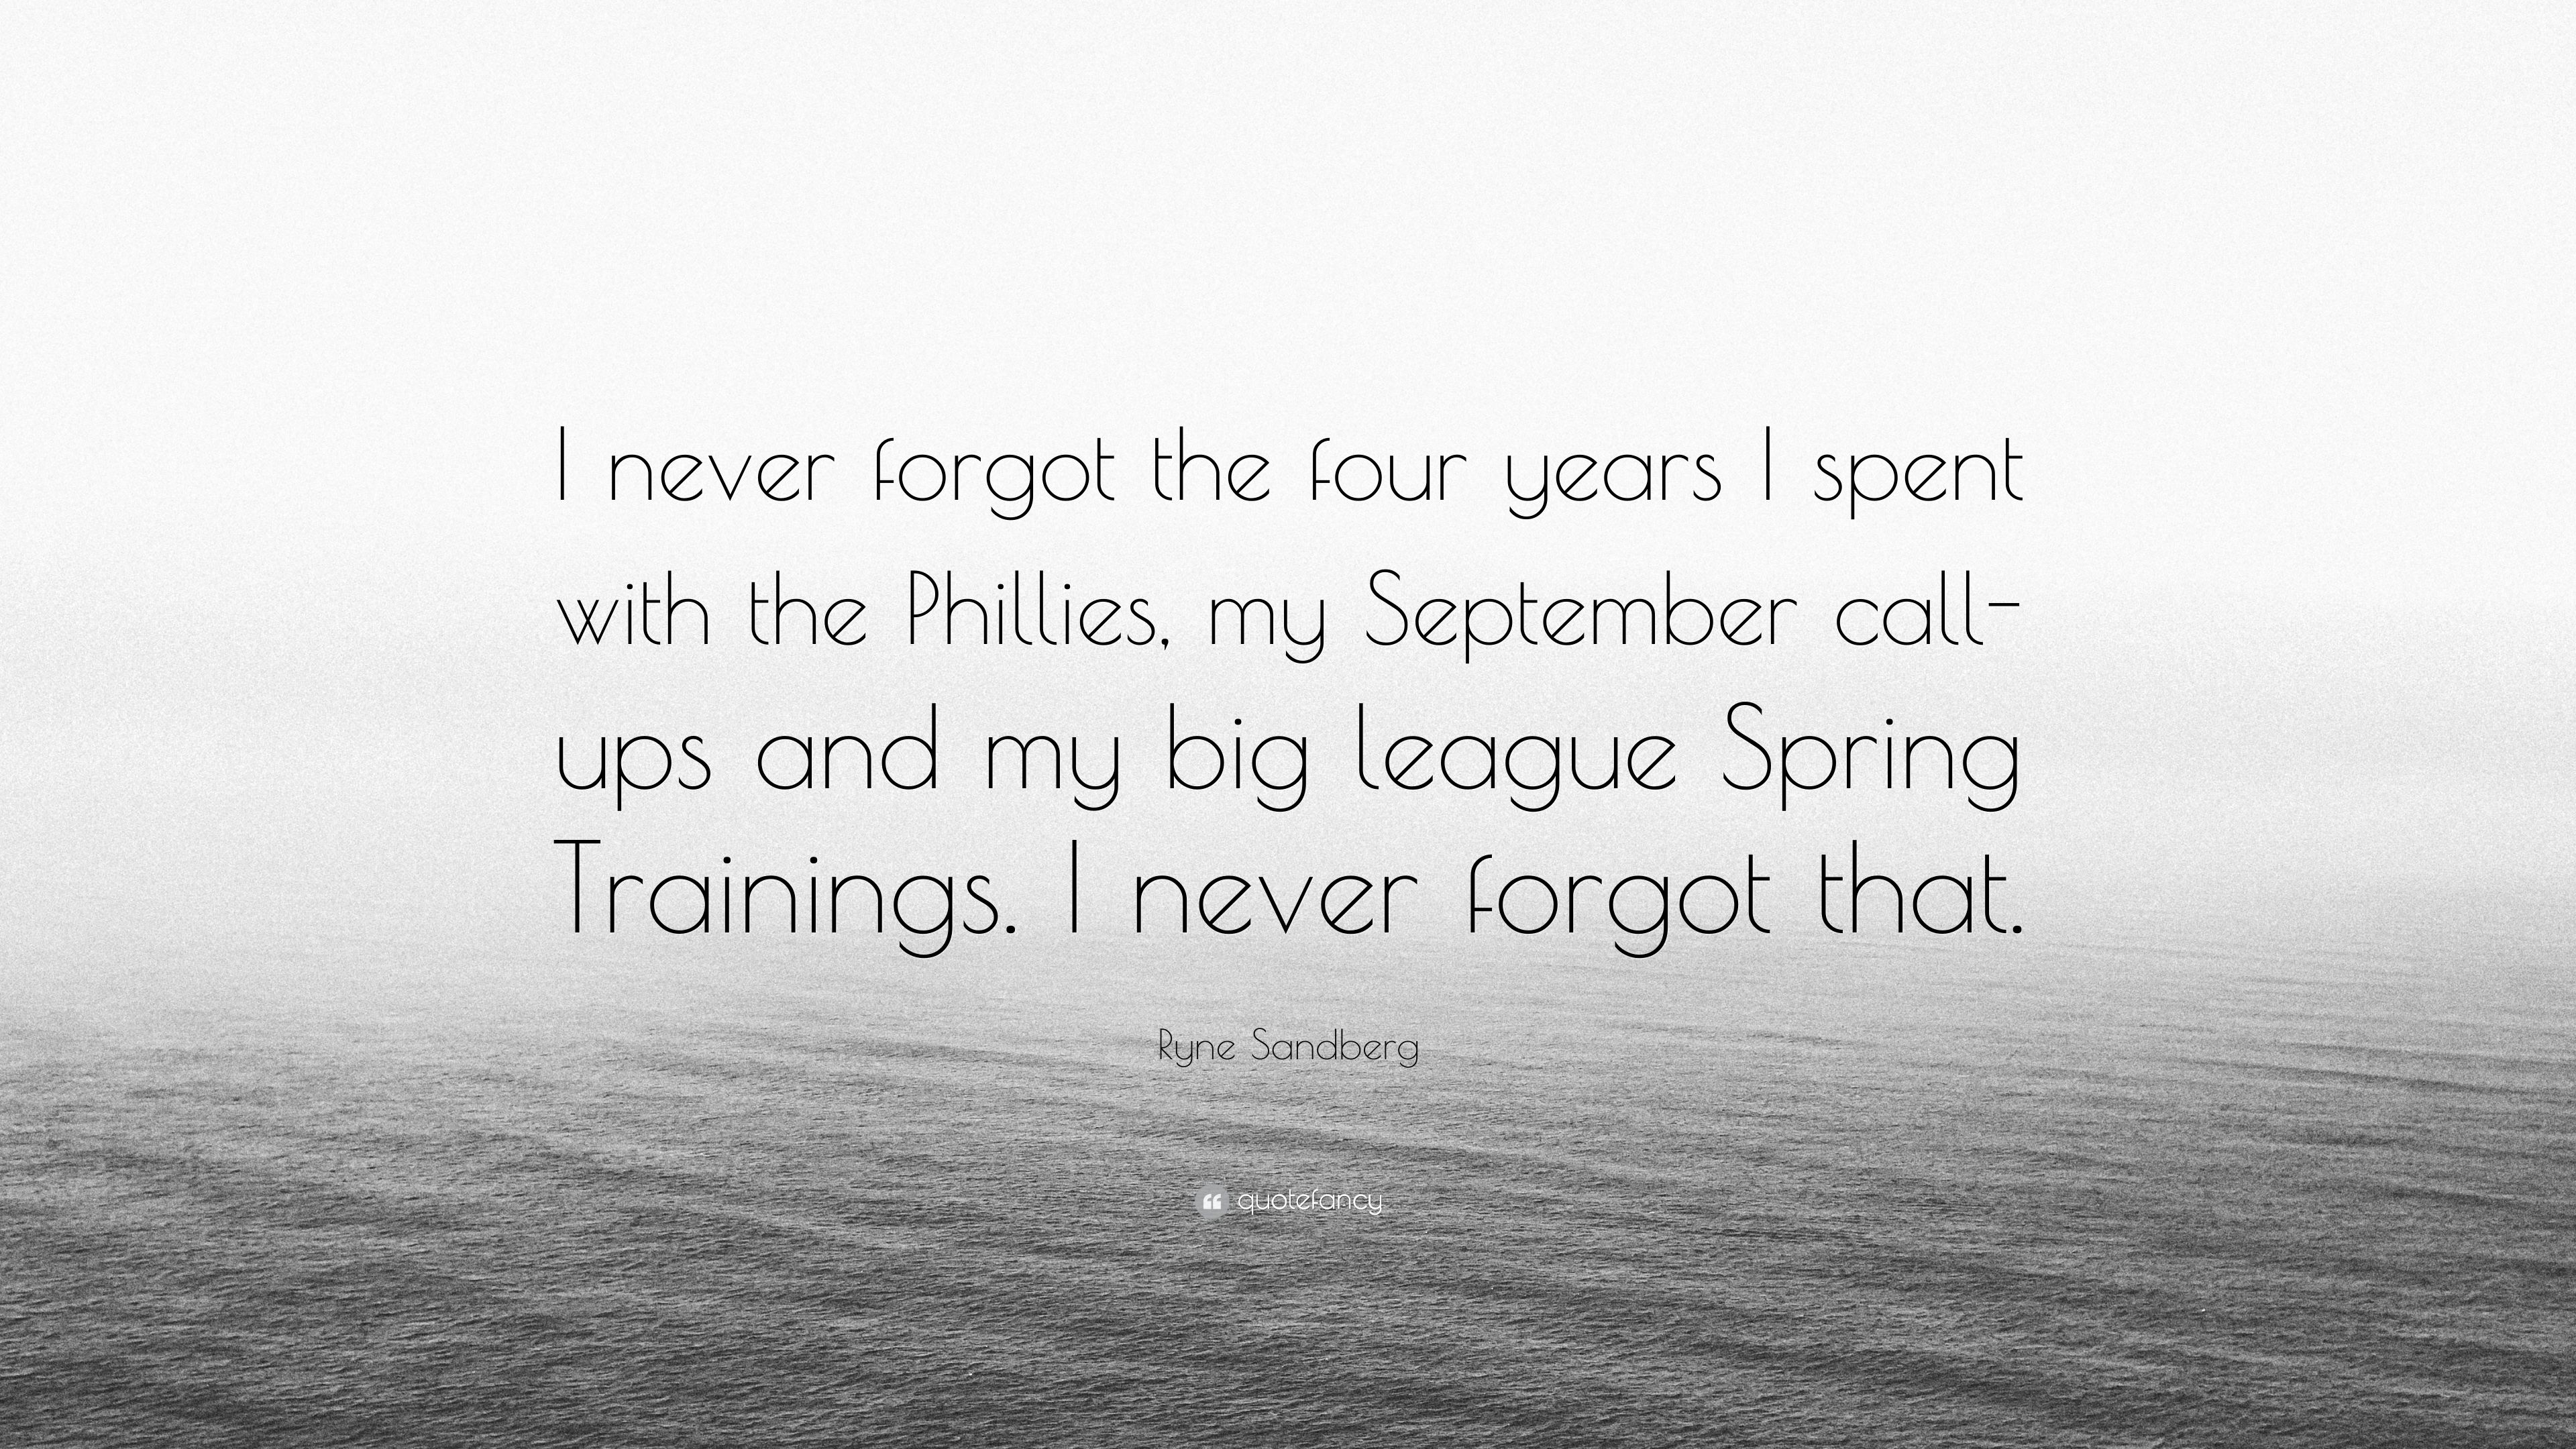 Ryne Sandberg Quote: “I never forgot the four years I spent with